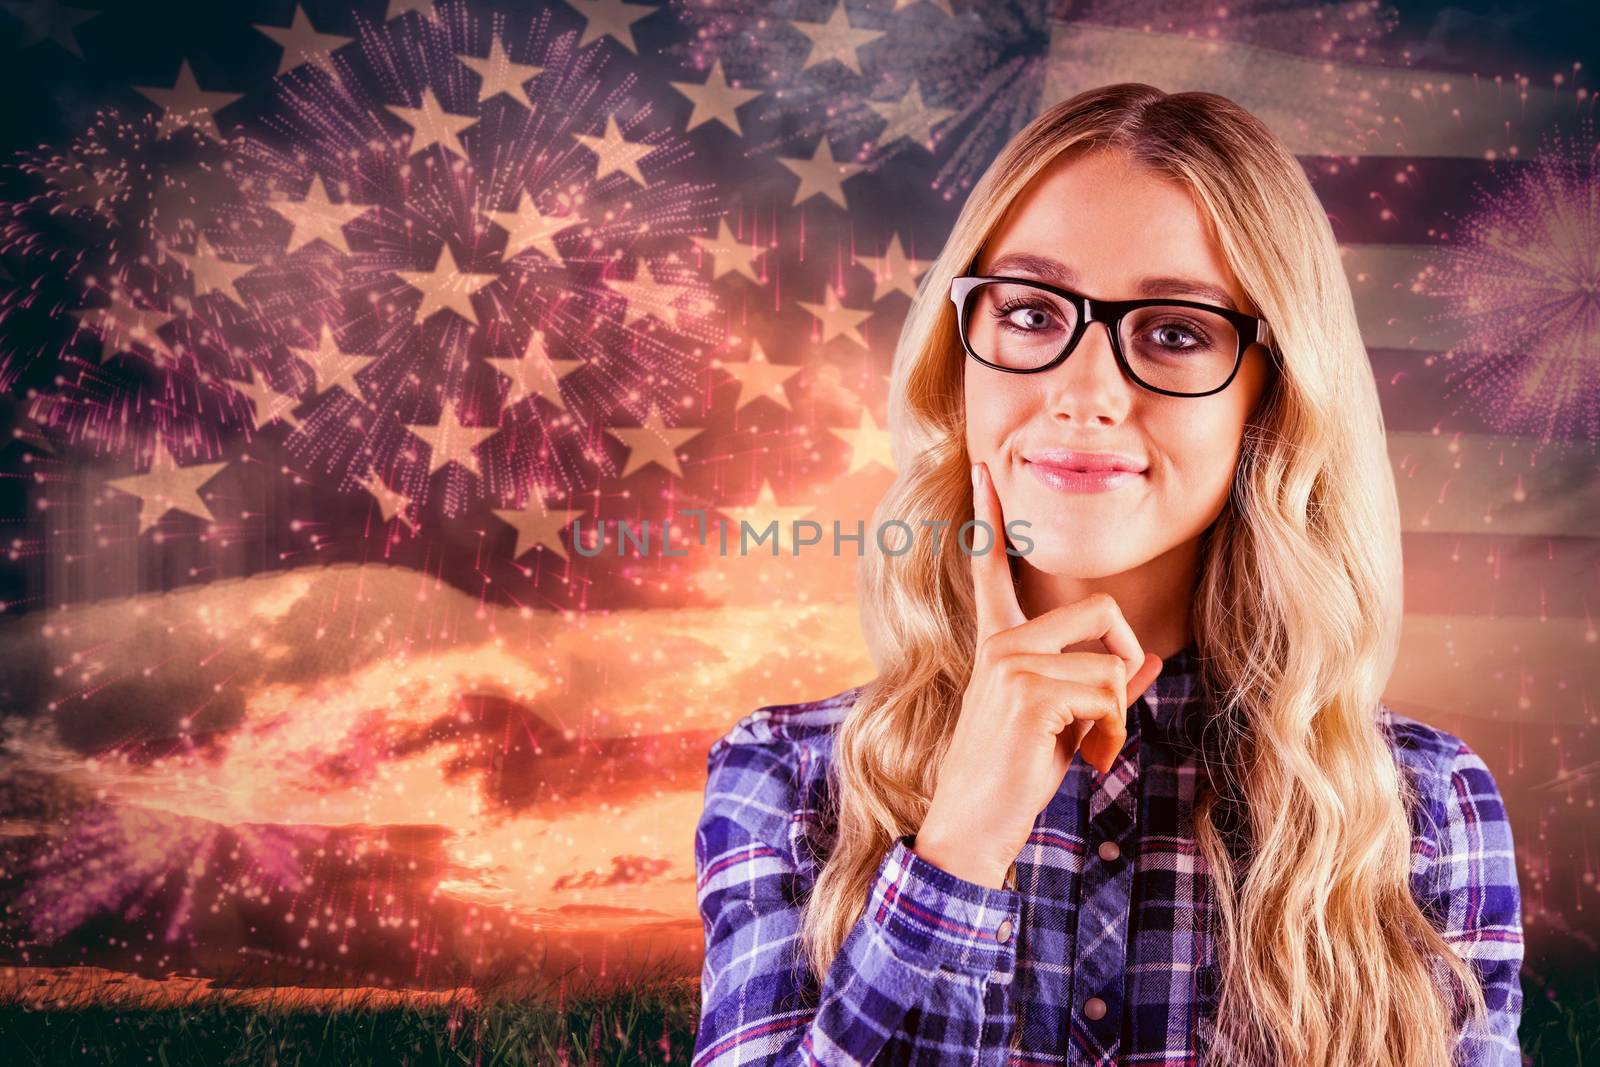 Gorgeous smiling blonde hipster thinking against composite image of colourful fireworks exploding on black background